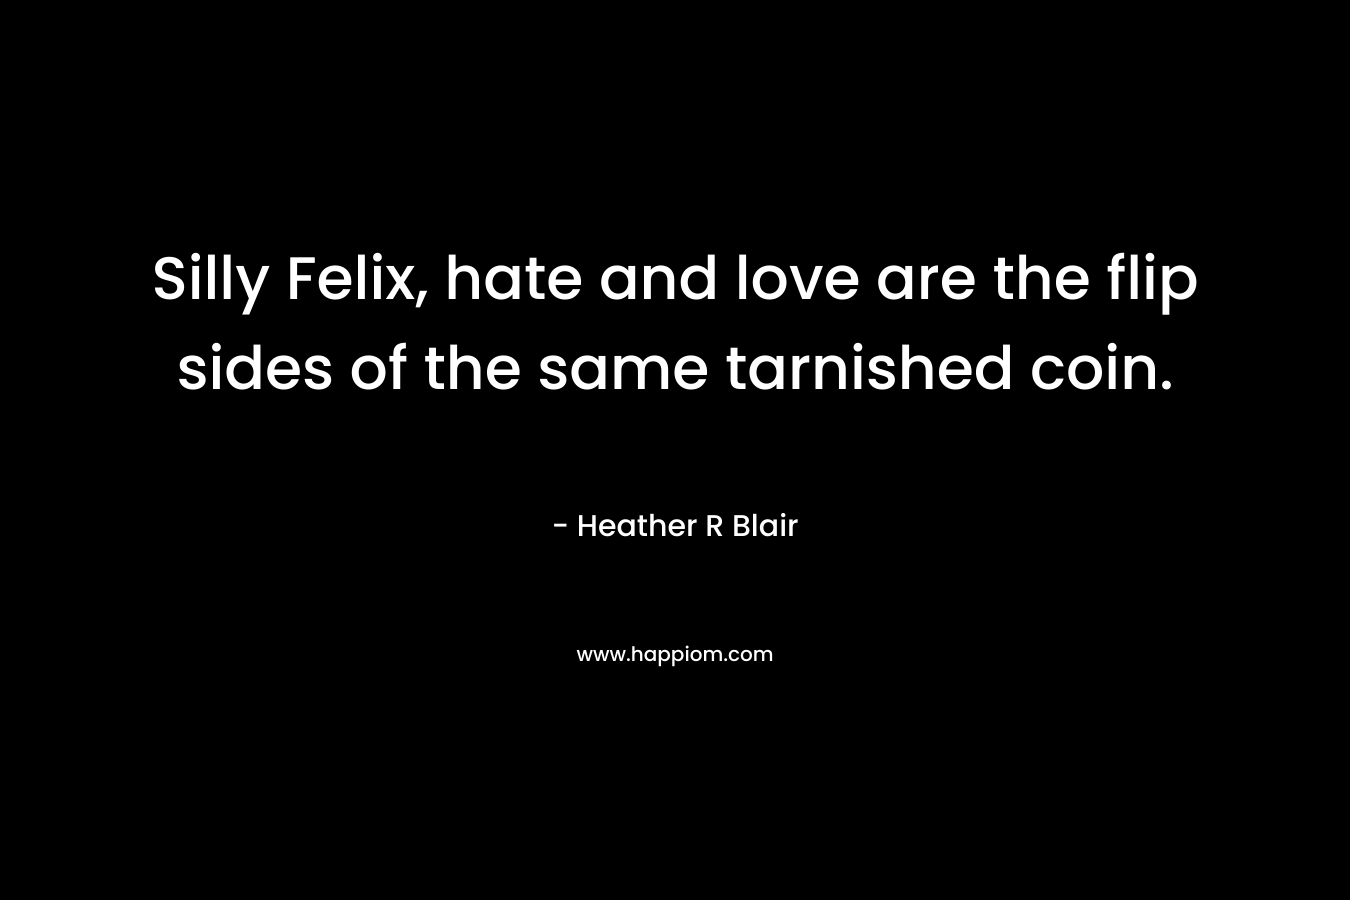 Silly Felix, hate and love are the flip sides of the same tarnished coin.